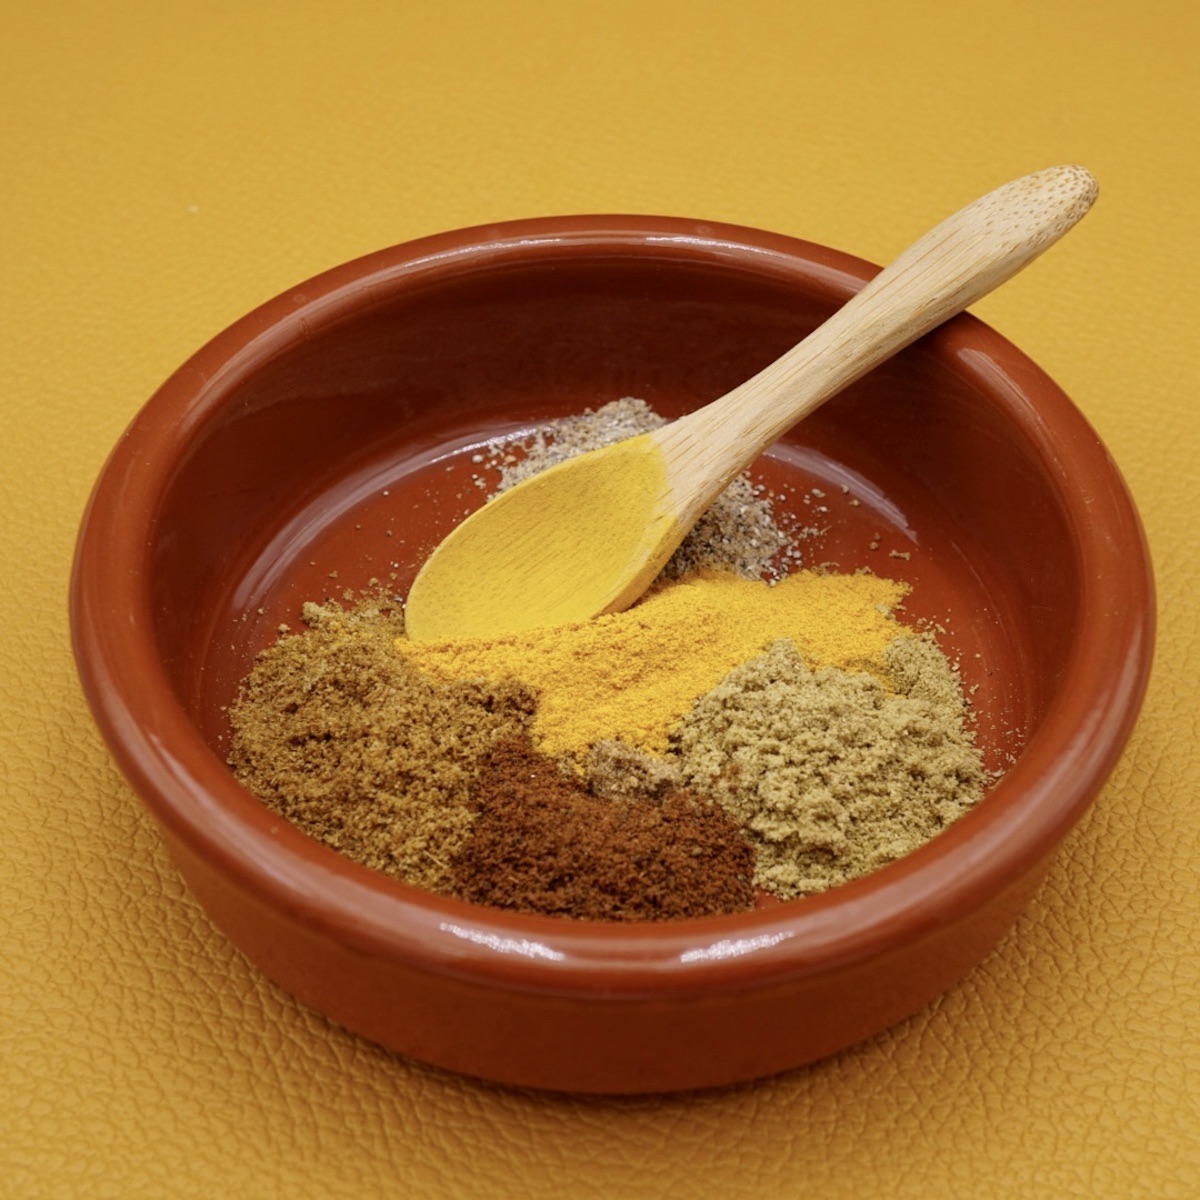 A mixture of spices in a bowl.